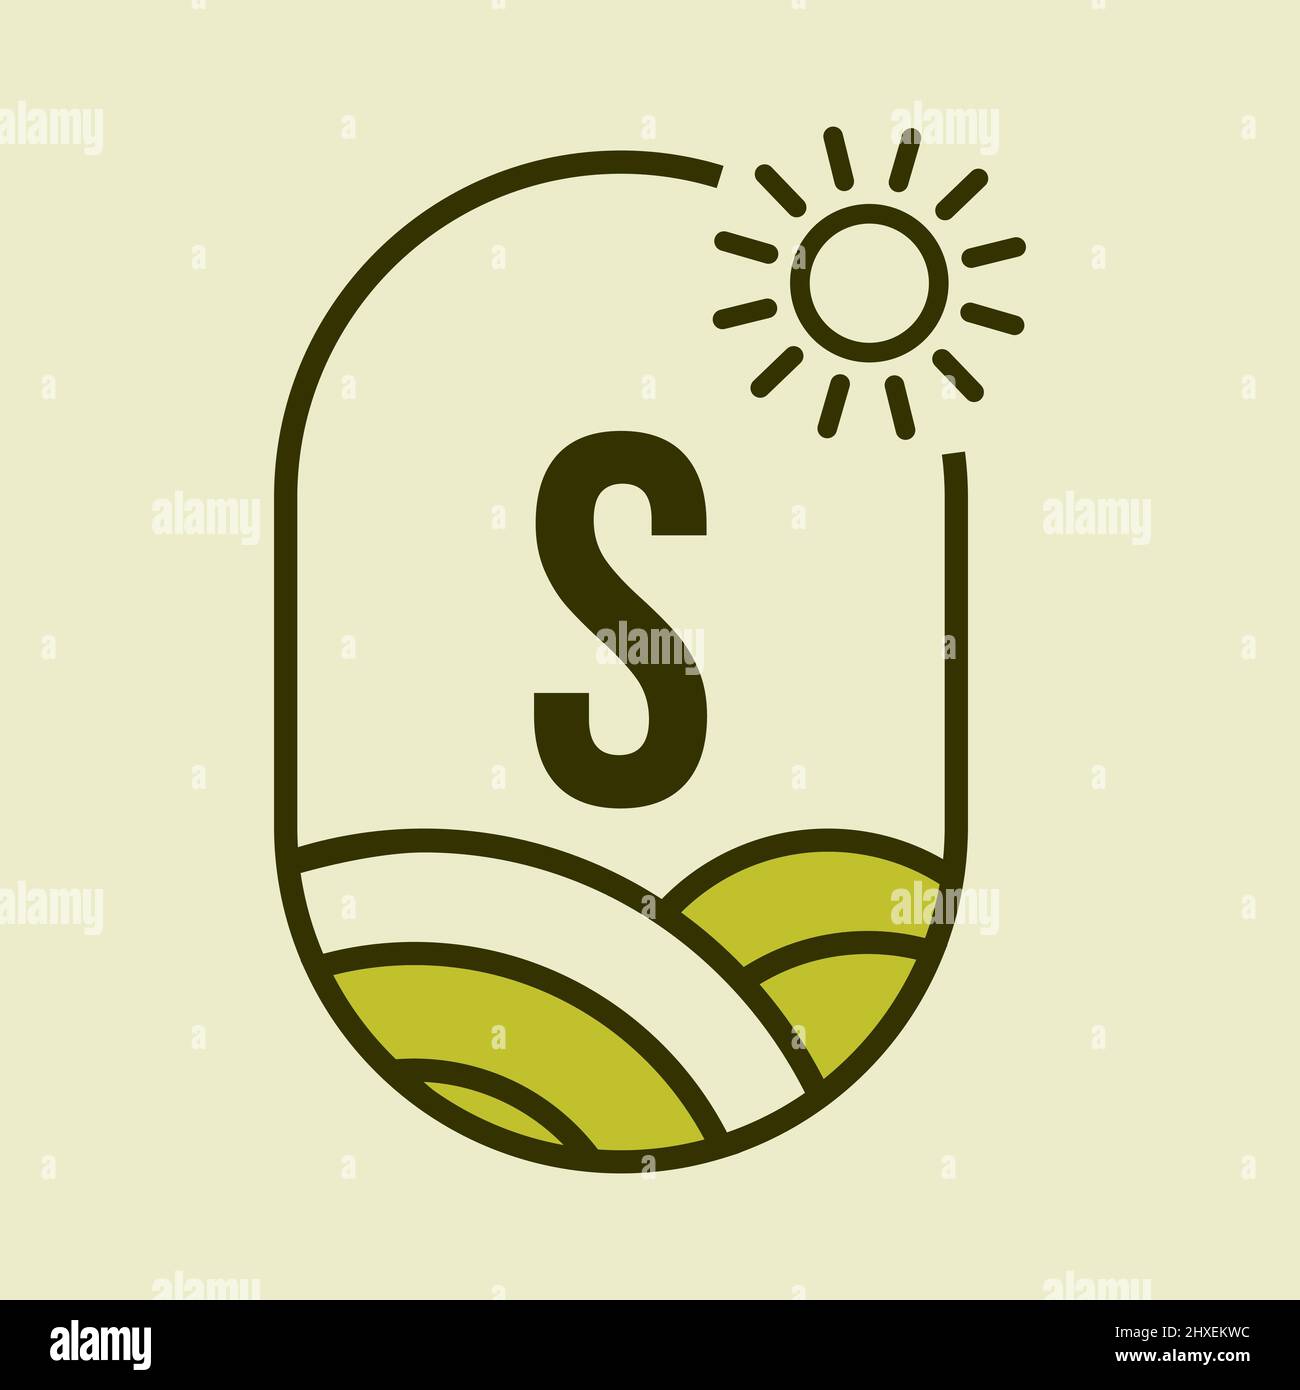 Agriculture Logo On Letter S Emblem Template. Farmland Letter S Agro Farm, Agribusiness, Eco-farm Sign with Sun and Agricultural Field Symbol Stock Vector